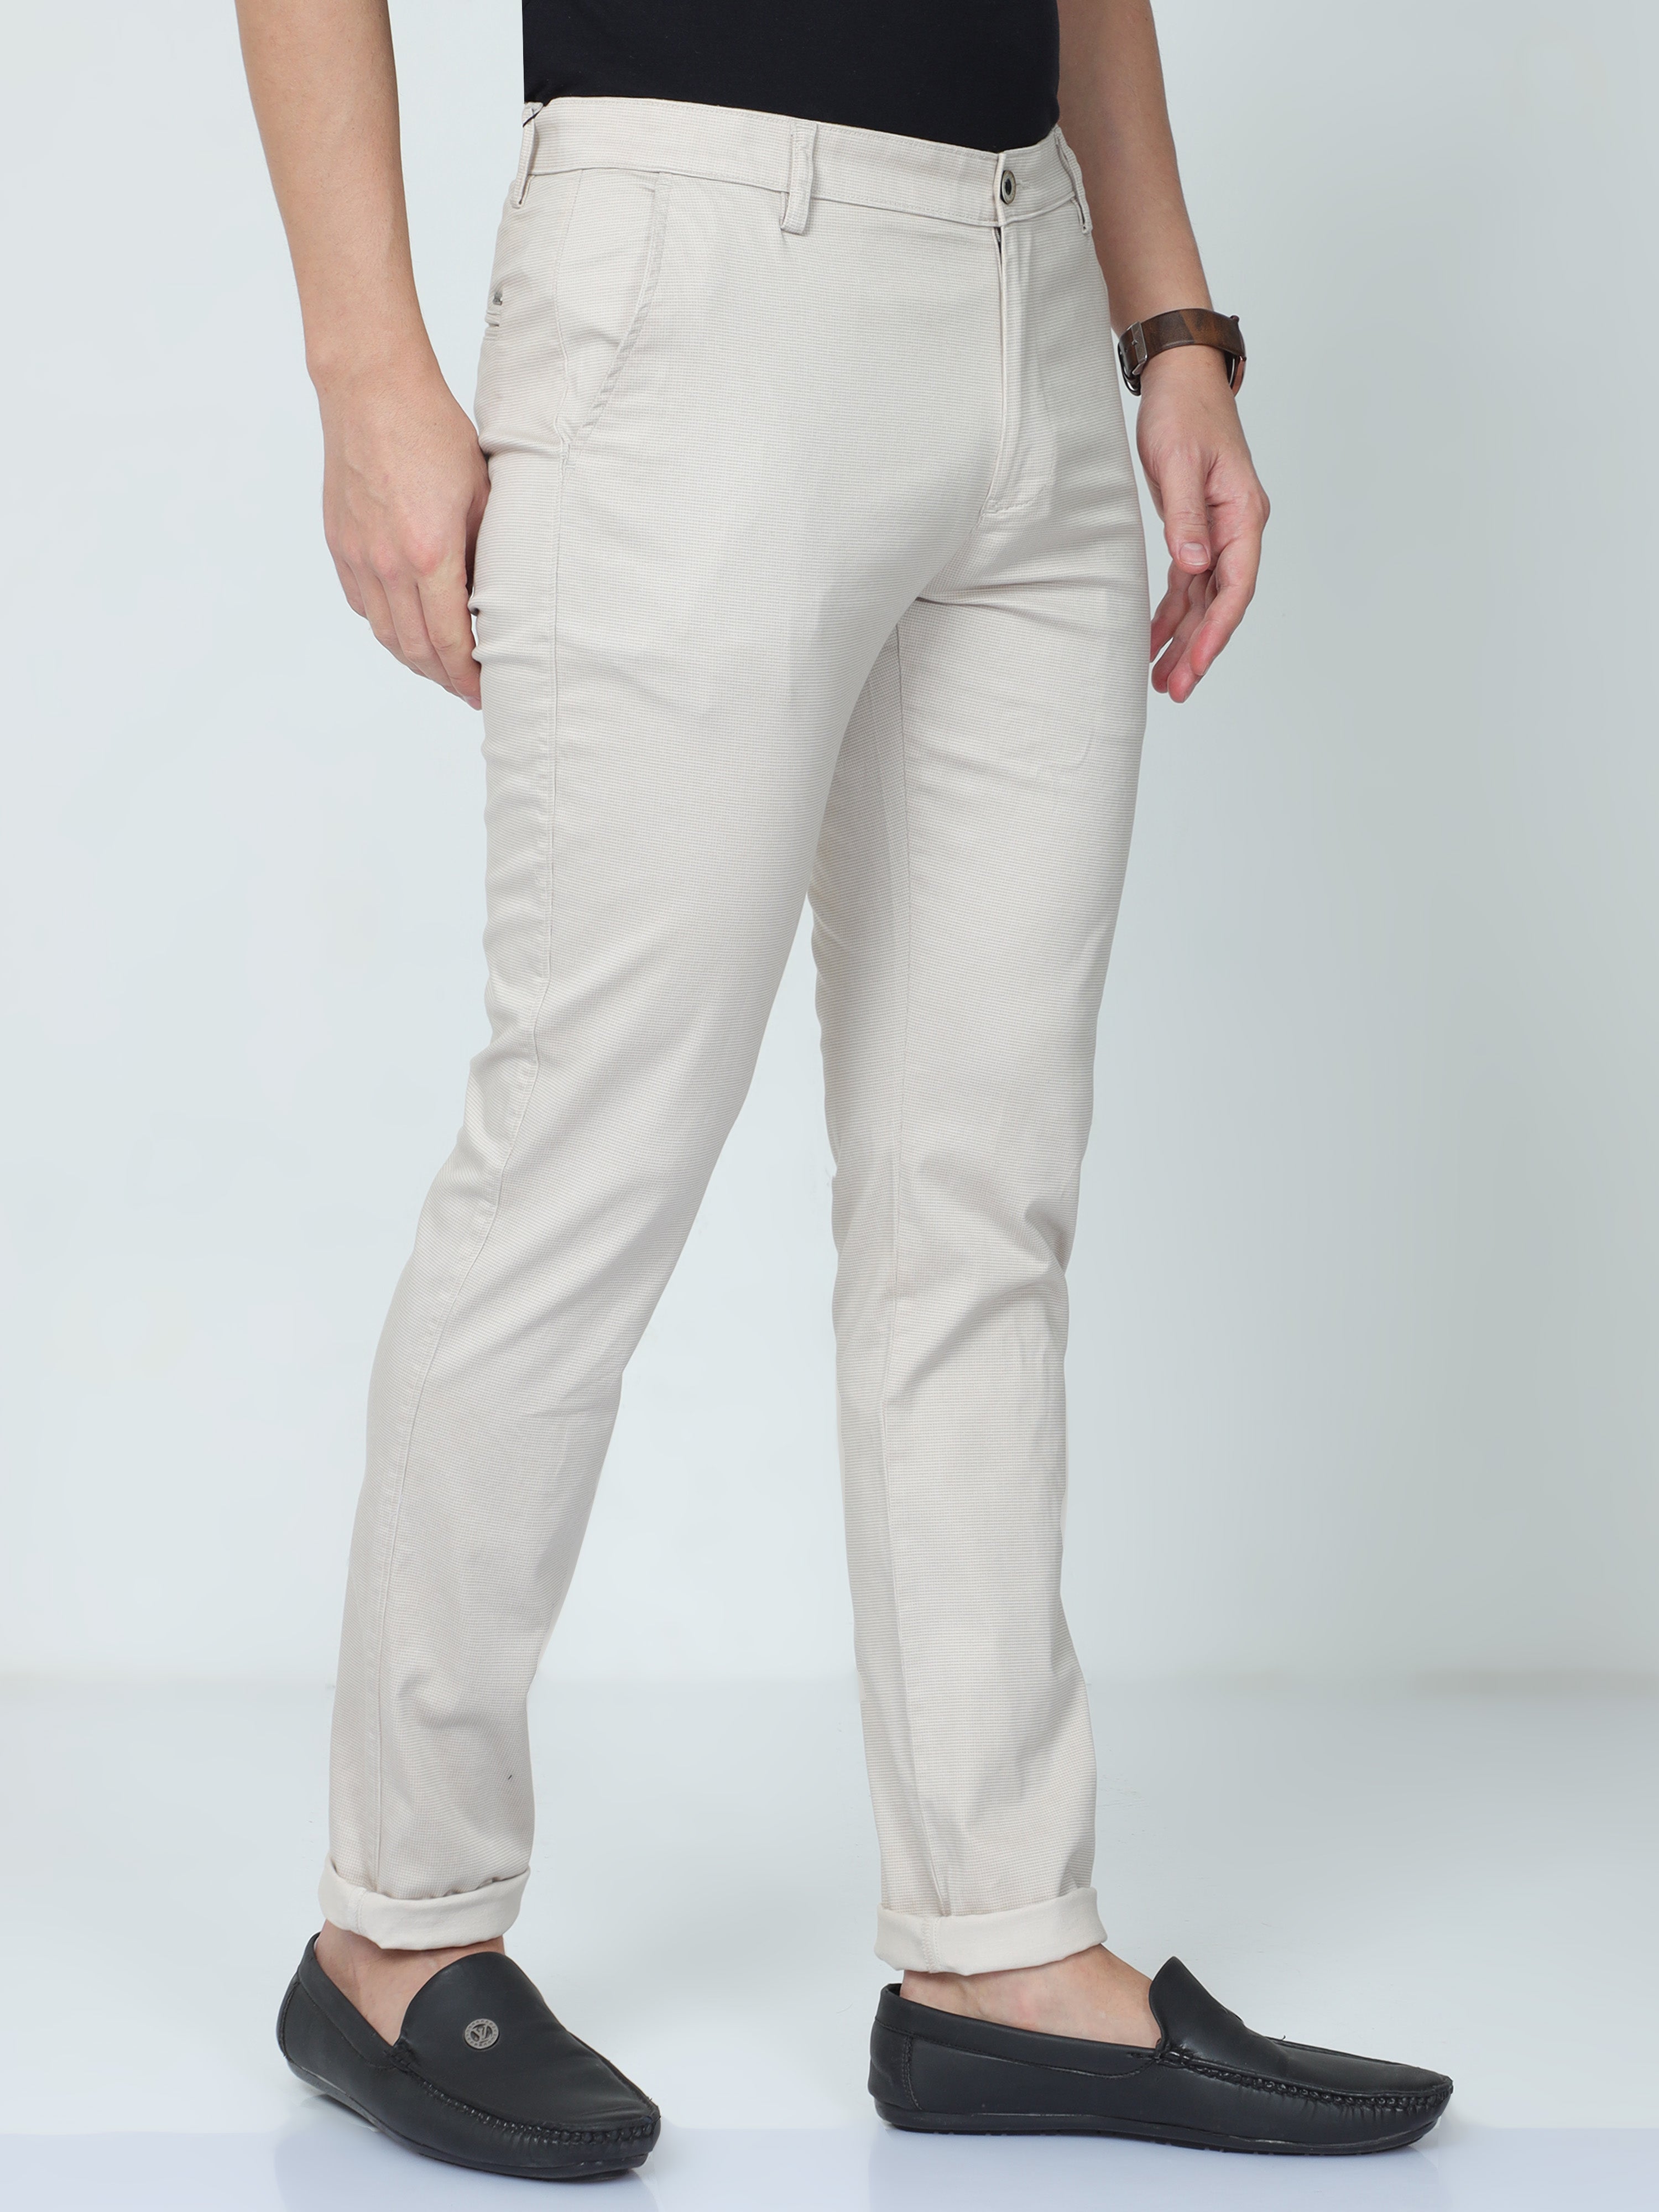 Classic Polo Mens Moderate Fit Solid Beige Color Trousers | To2-21 C-Beg-Mf-Ly